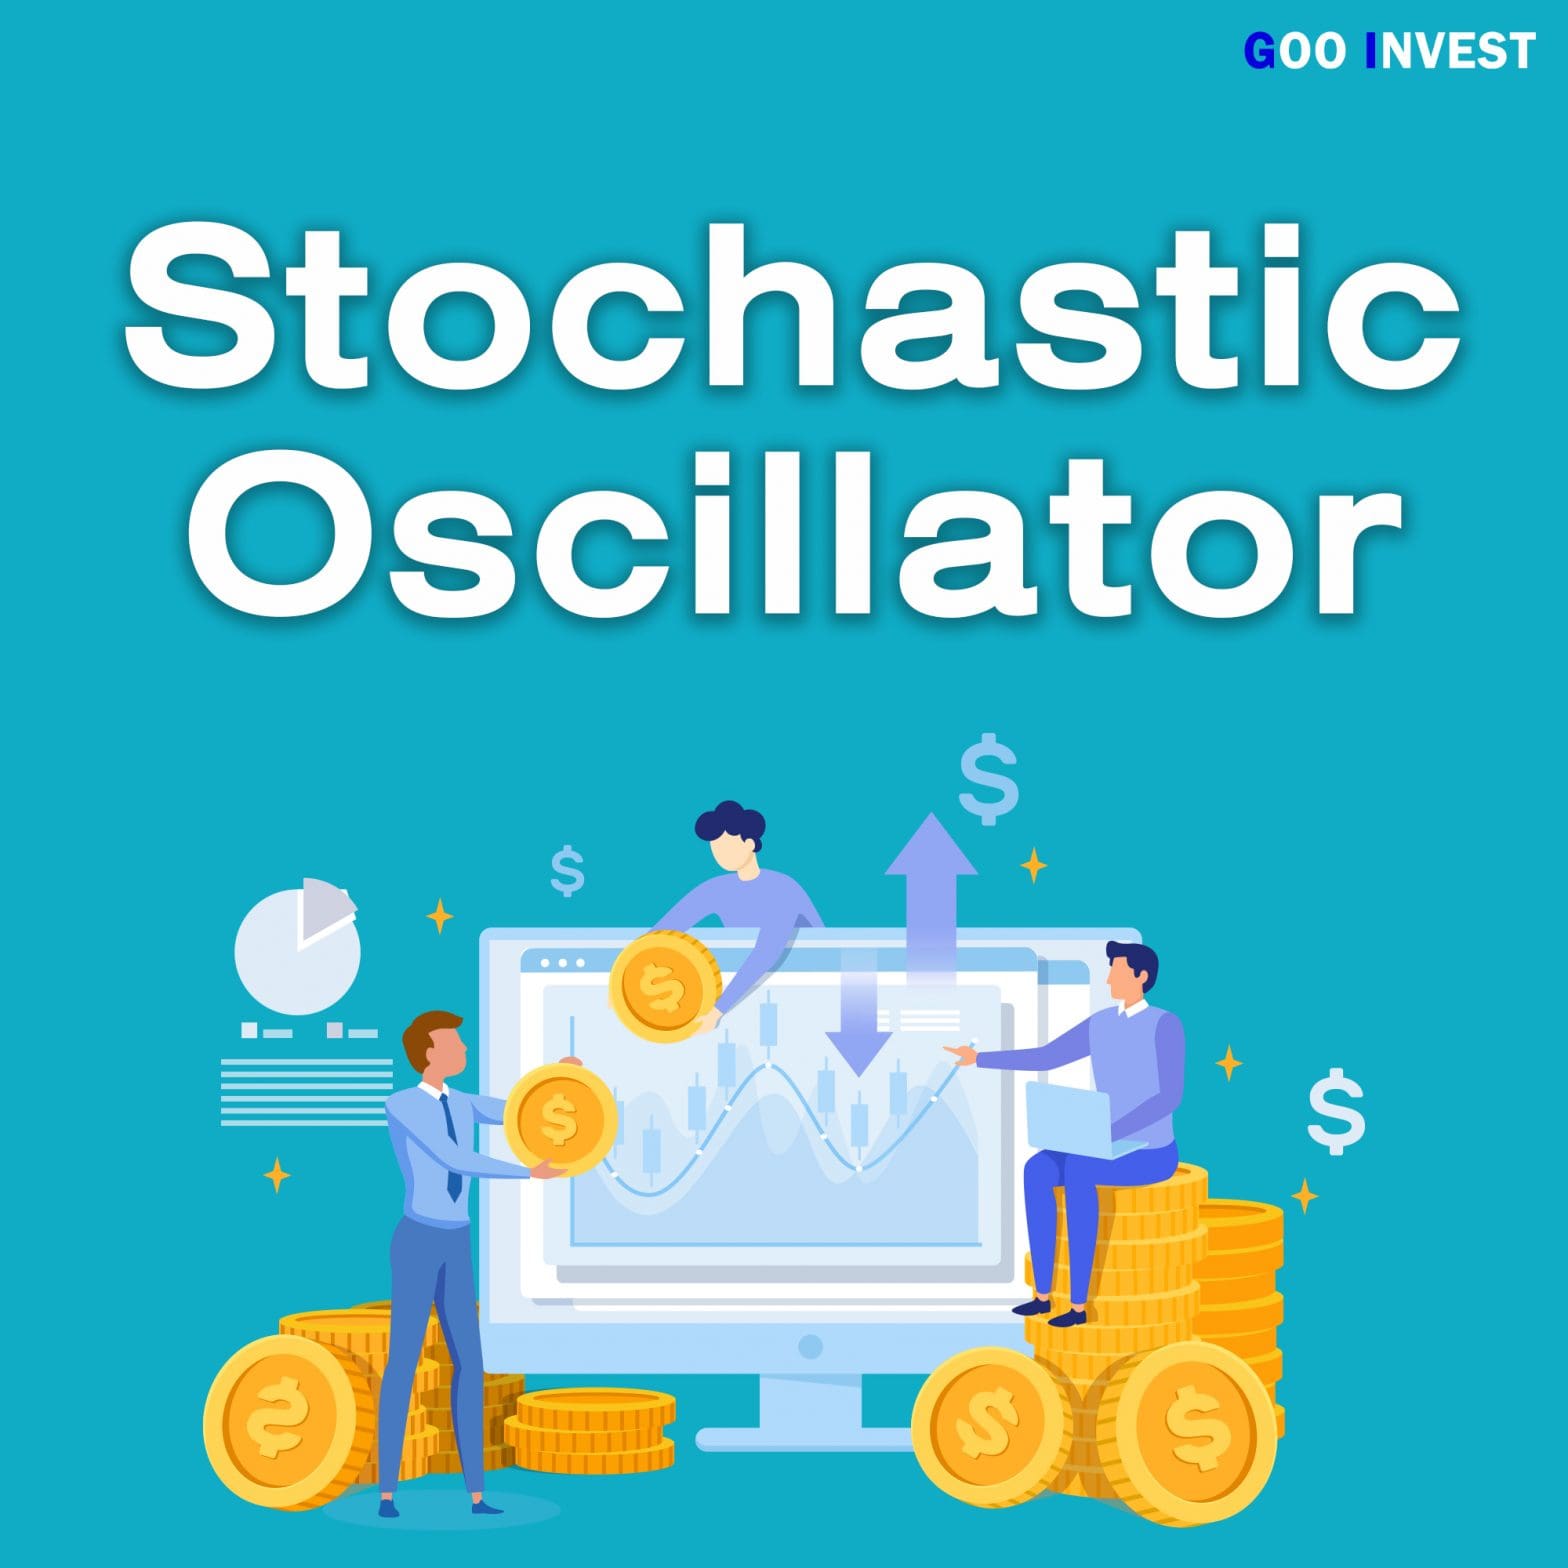 Front page Stochastic Oscillator Goo Invest